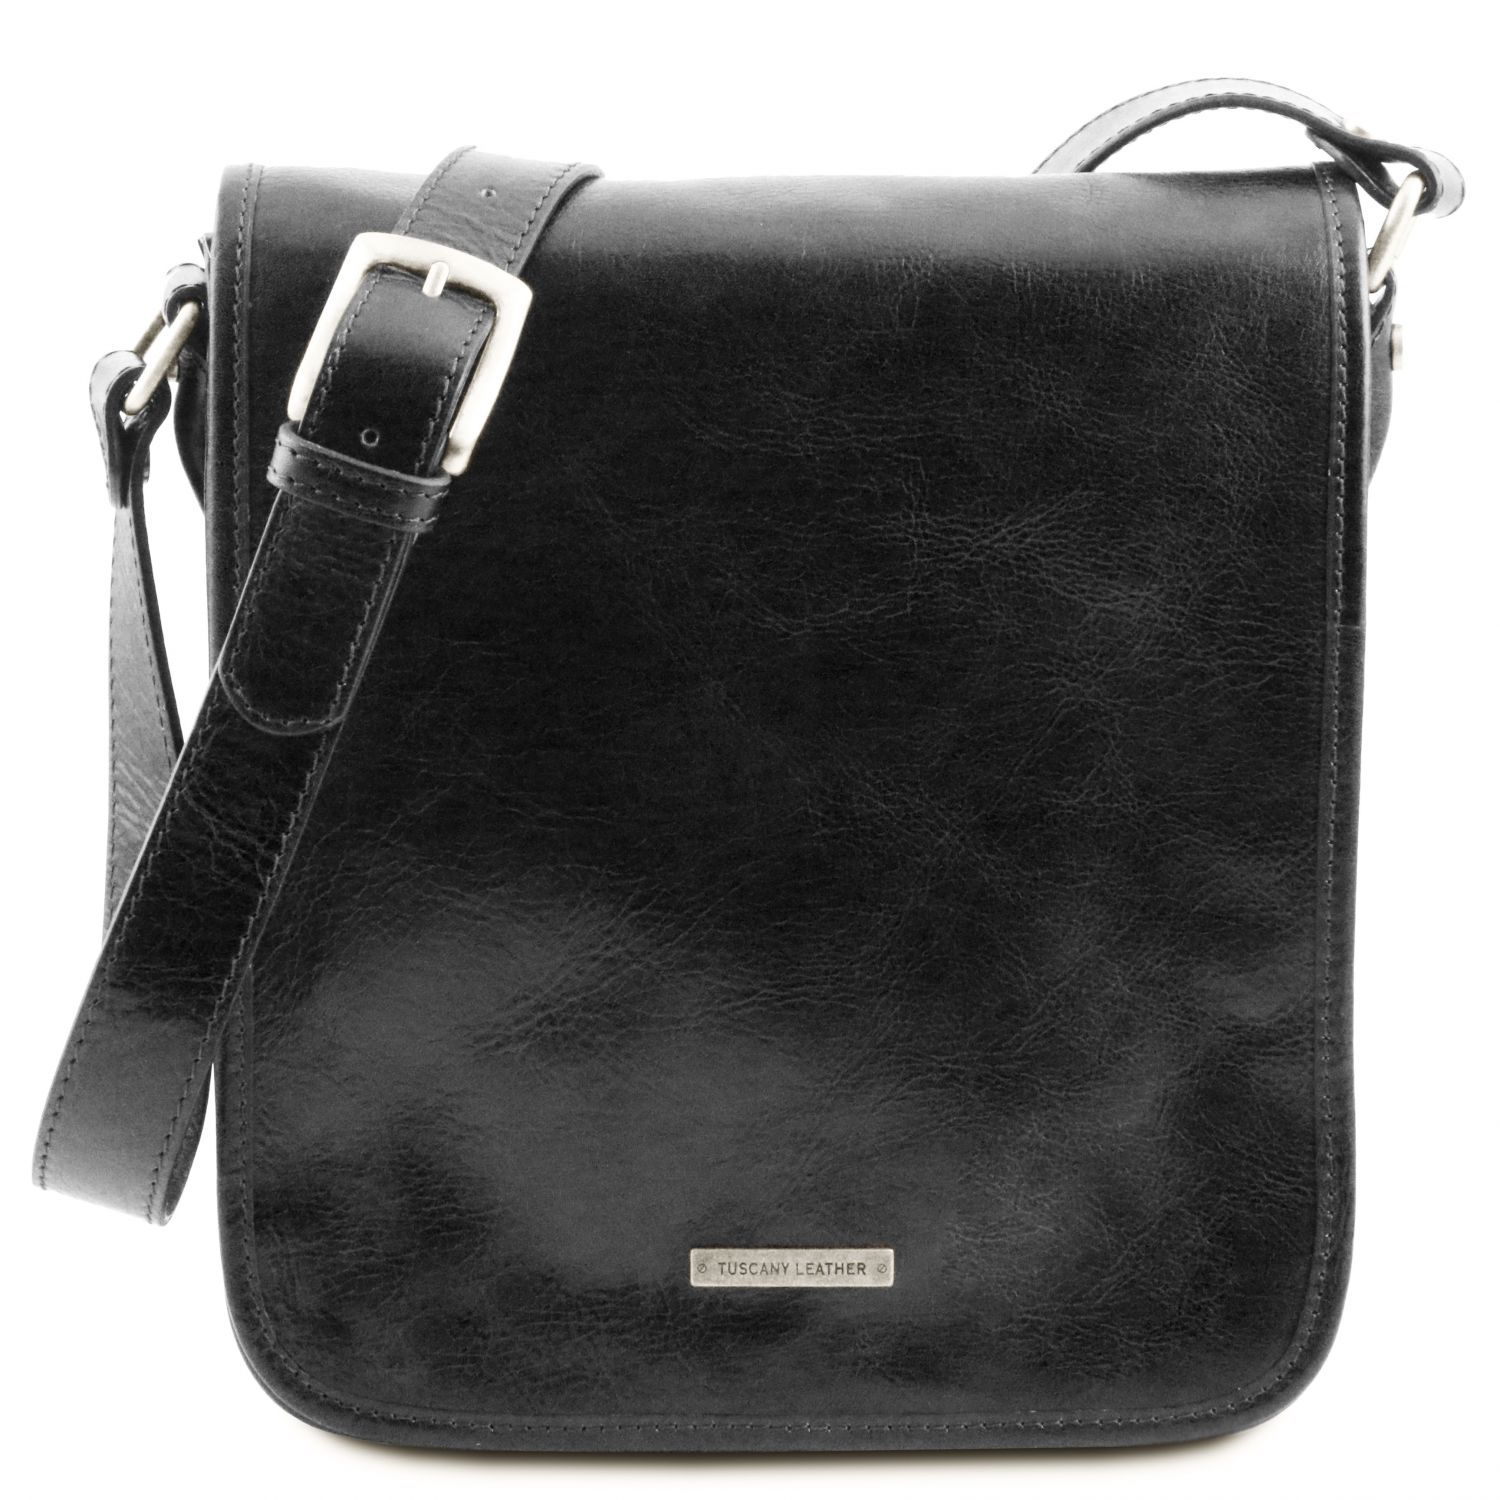 Leather Shoulder Bags With Compartments | Paul Smith